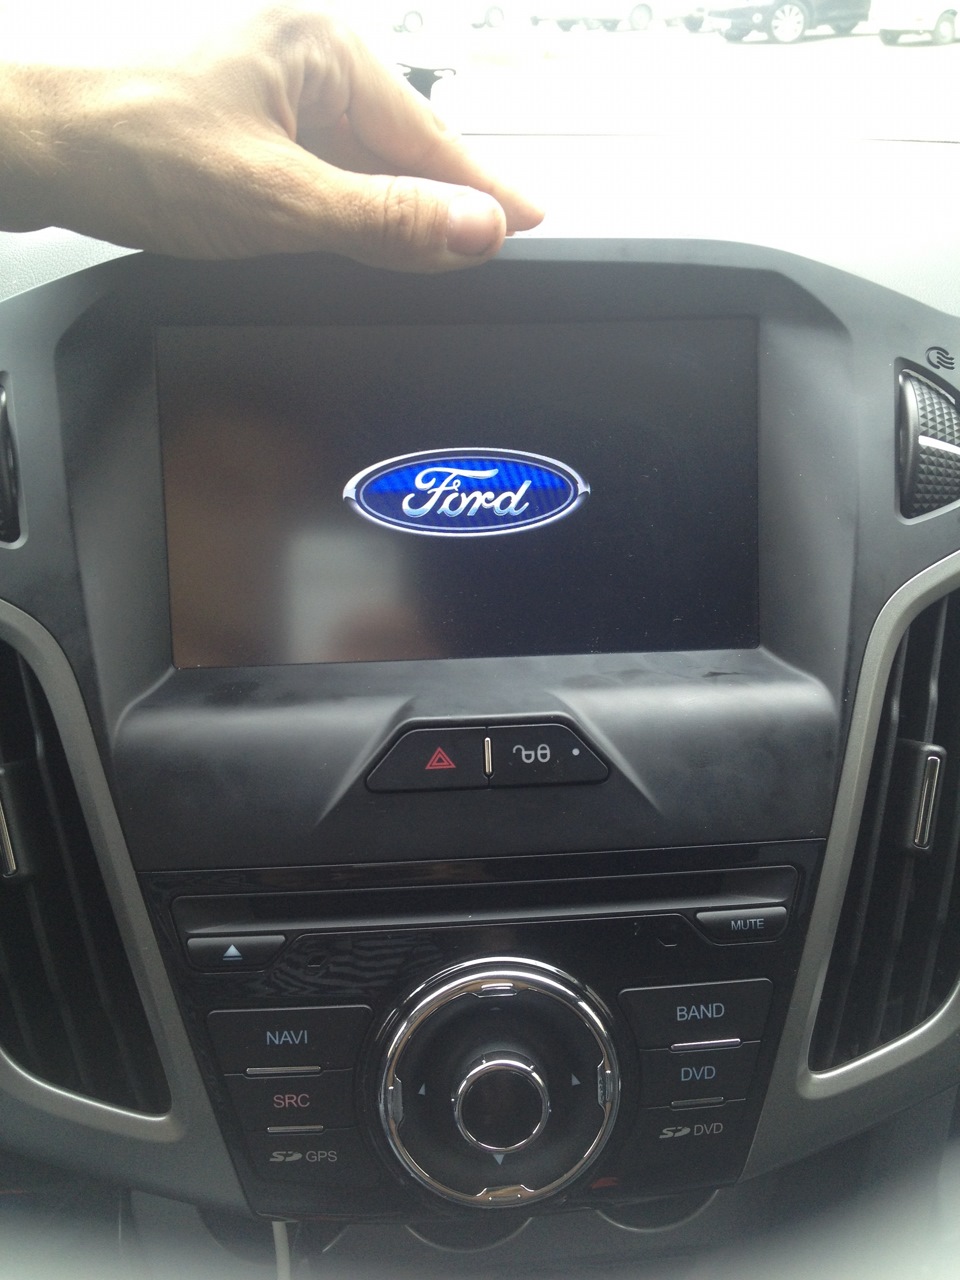 Android 4 2 Ford Focus Radio - YouTube